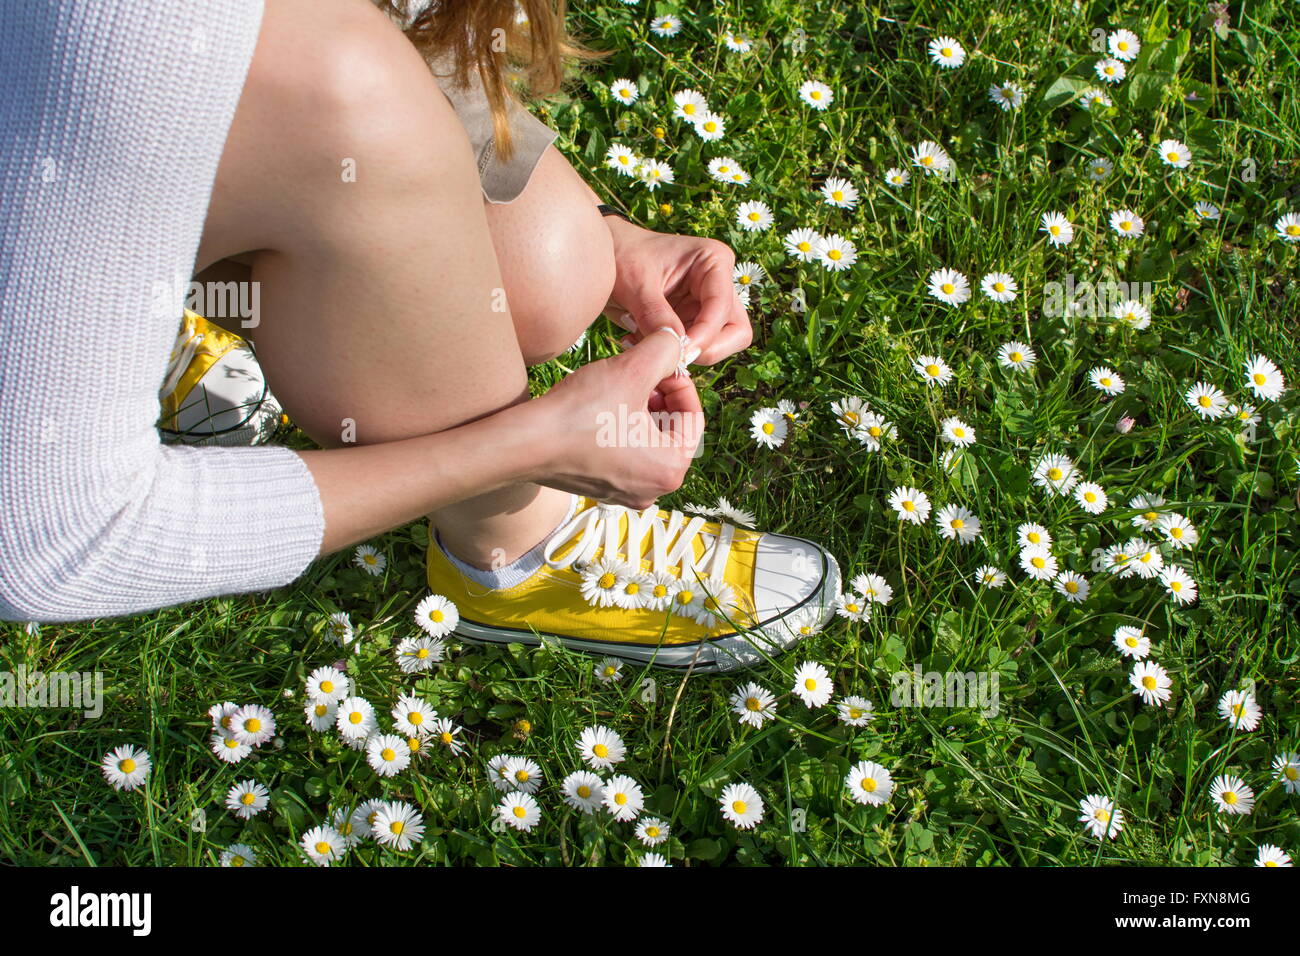 Woman picking daisies in a daisy field Stock Photo